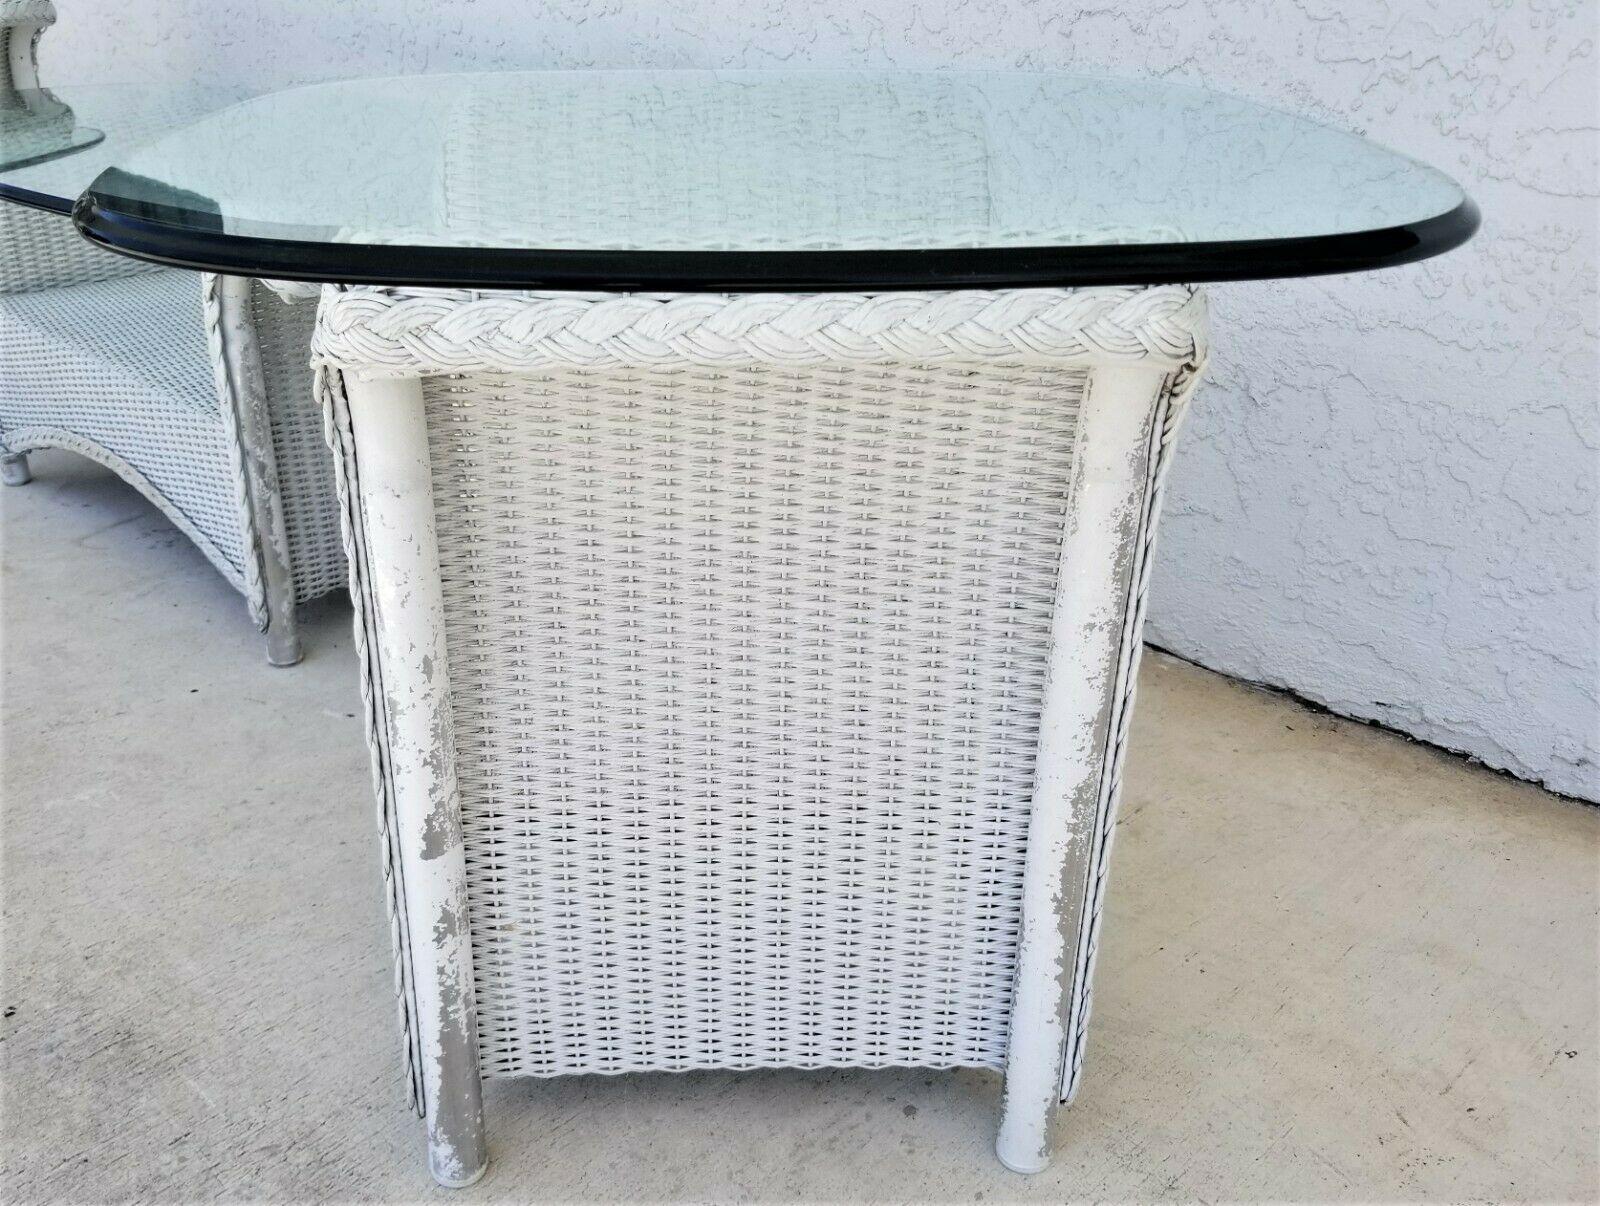 For FULL item description click on CONTINUE READING at the bottom of this page.

Offering One Of Our Recent Palm Beach Estate Fine Furniture Acquisitions Of A
Vintage Set Of 2 LLOYD LOOM Flanders Wicker Weather Resistant Side Tables w Glass
With the